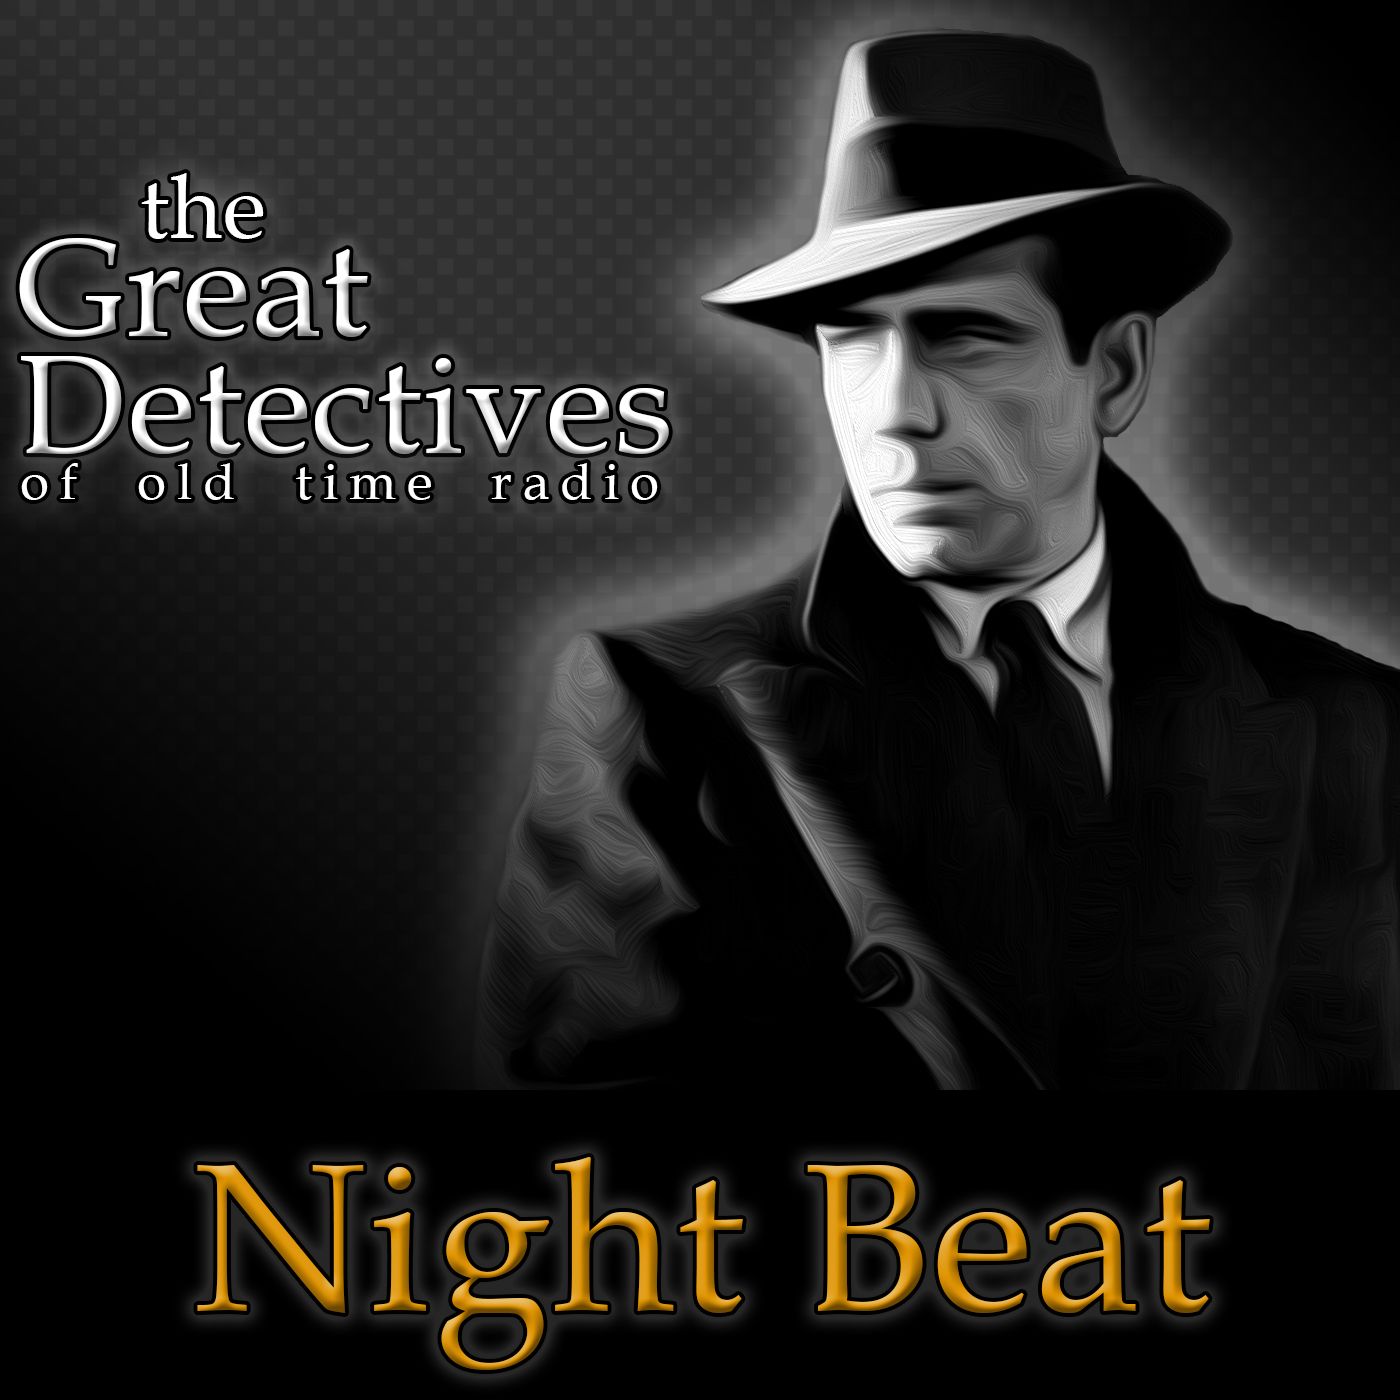 The Great Detectives Present Night Beat